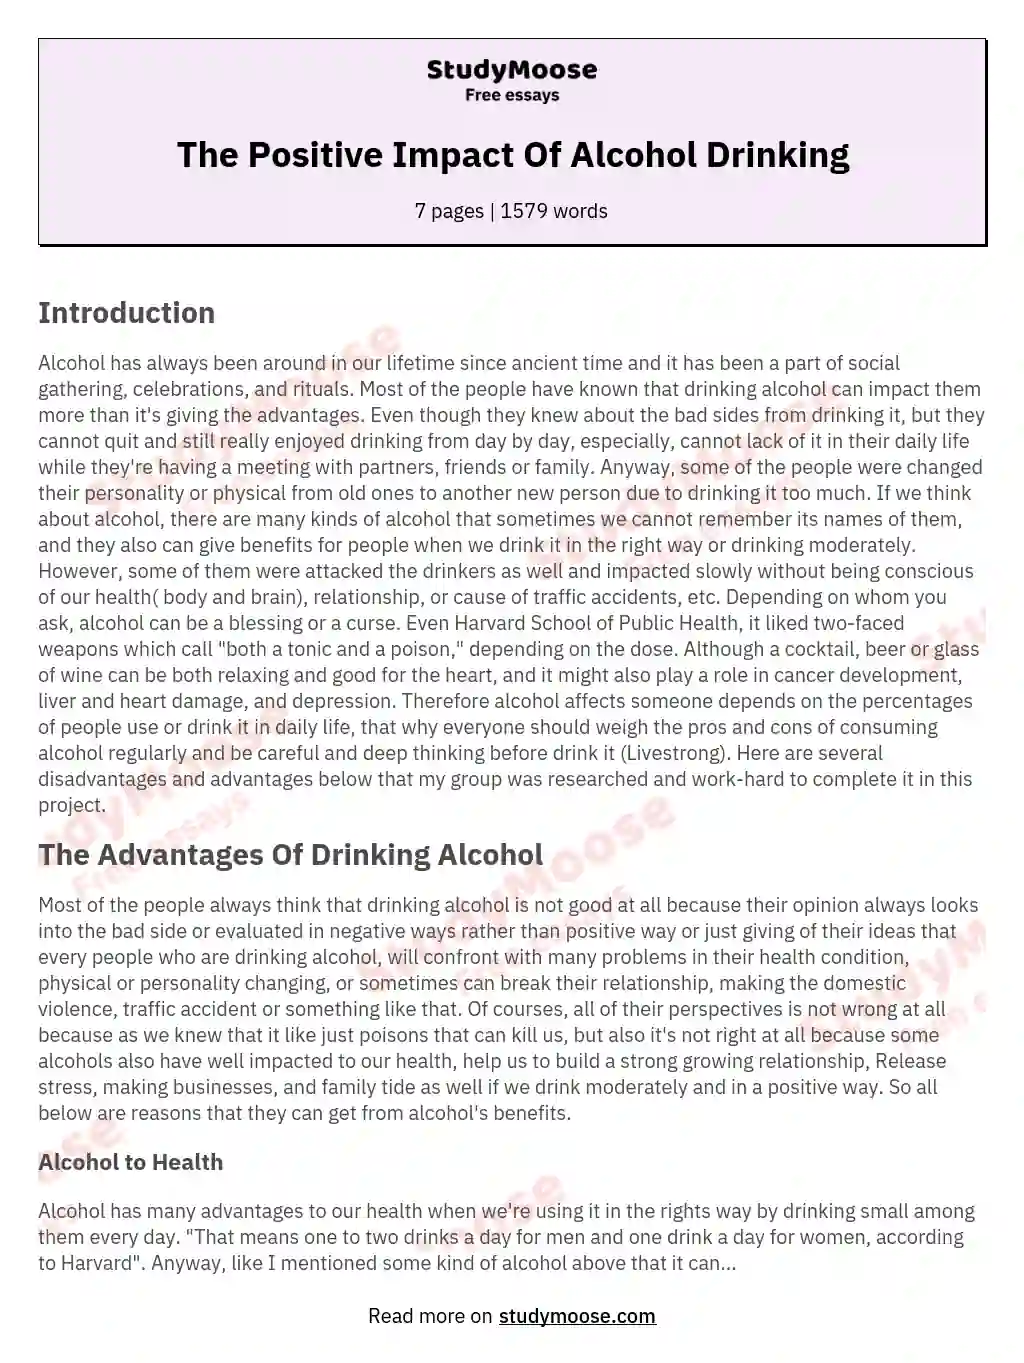 effects of drinking alcohol essay